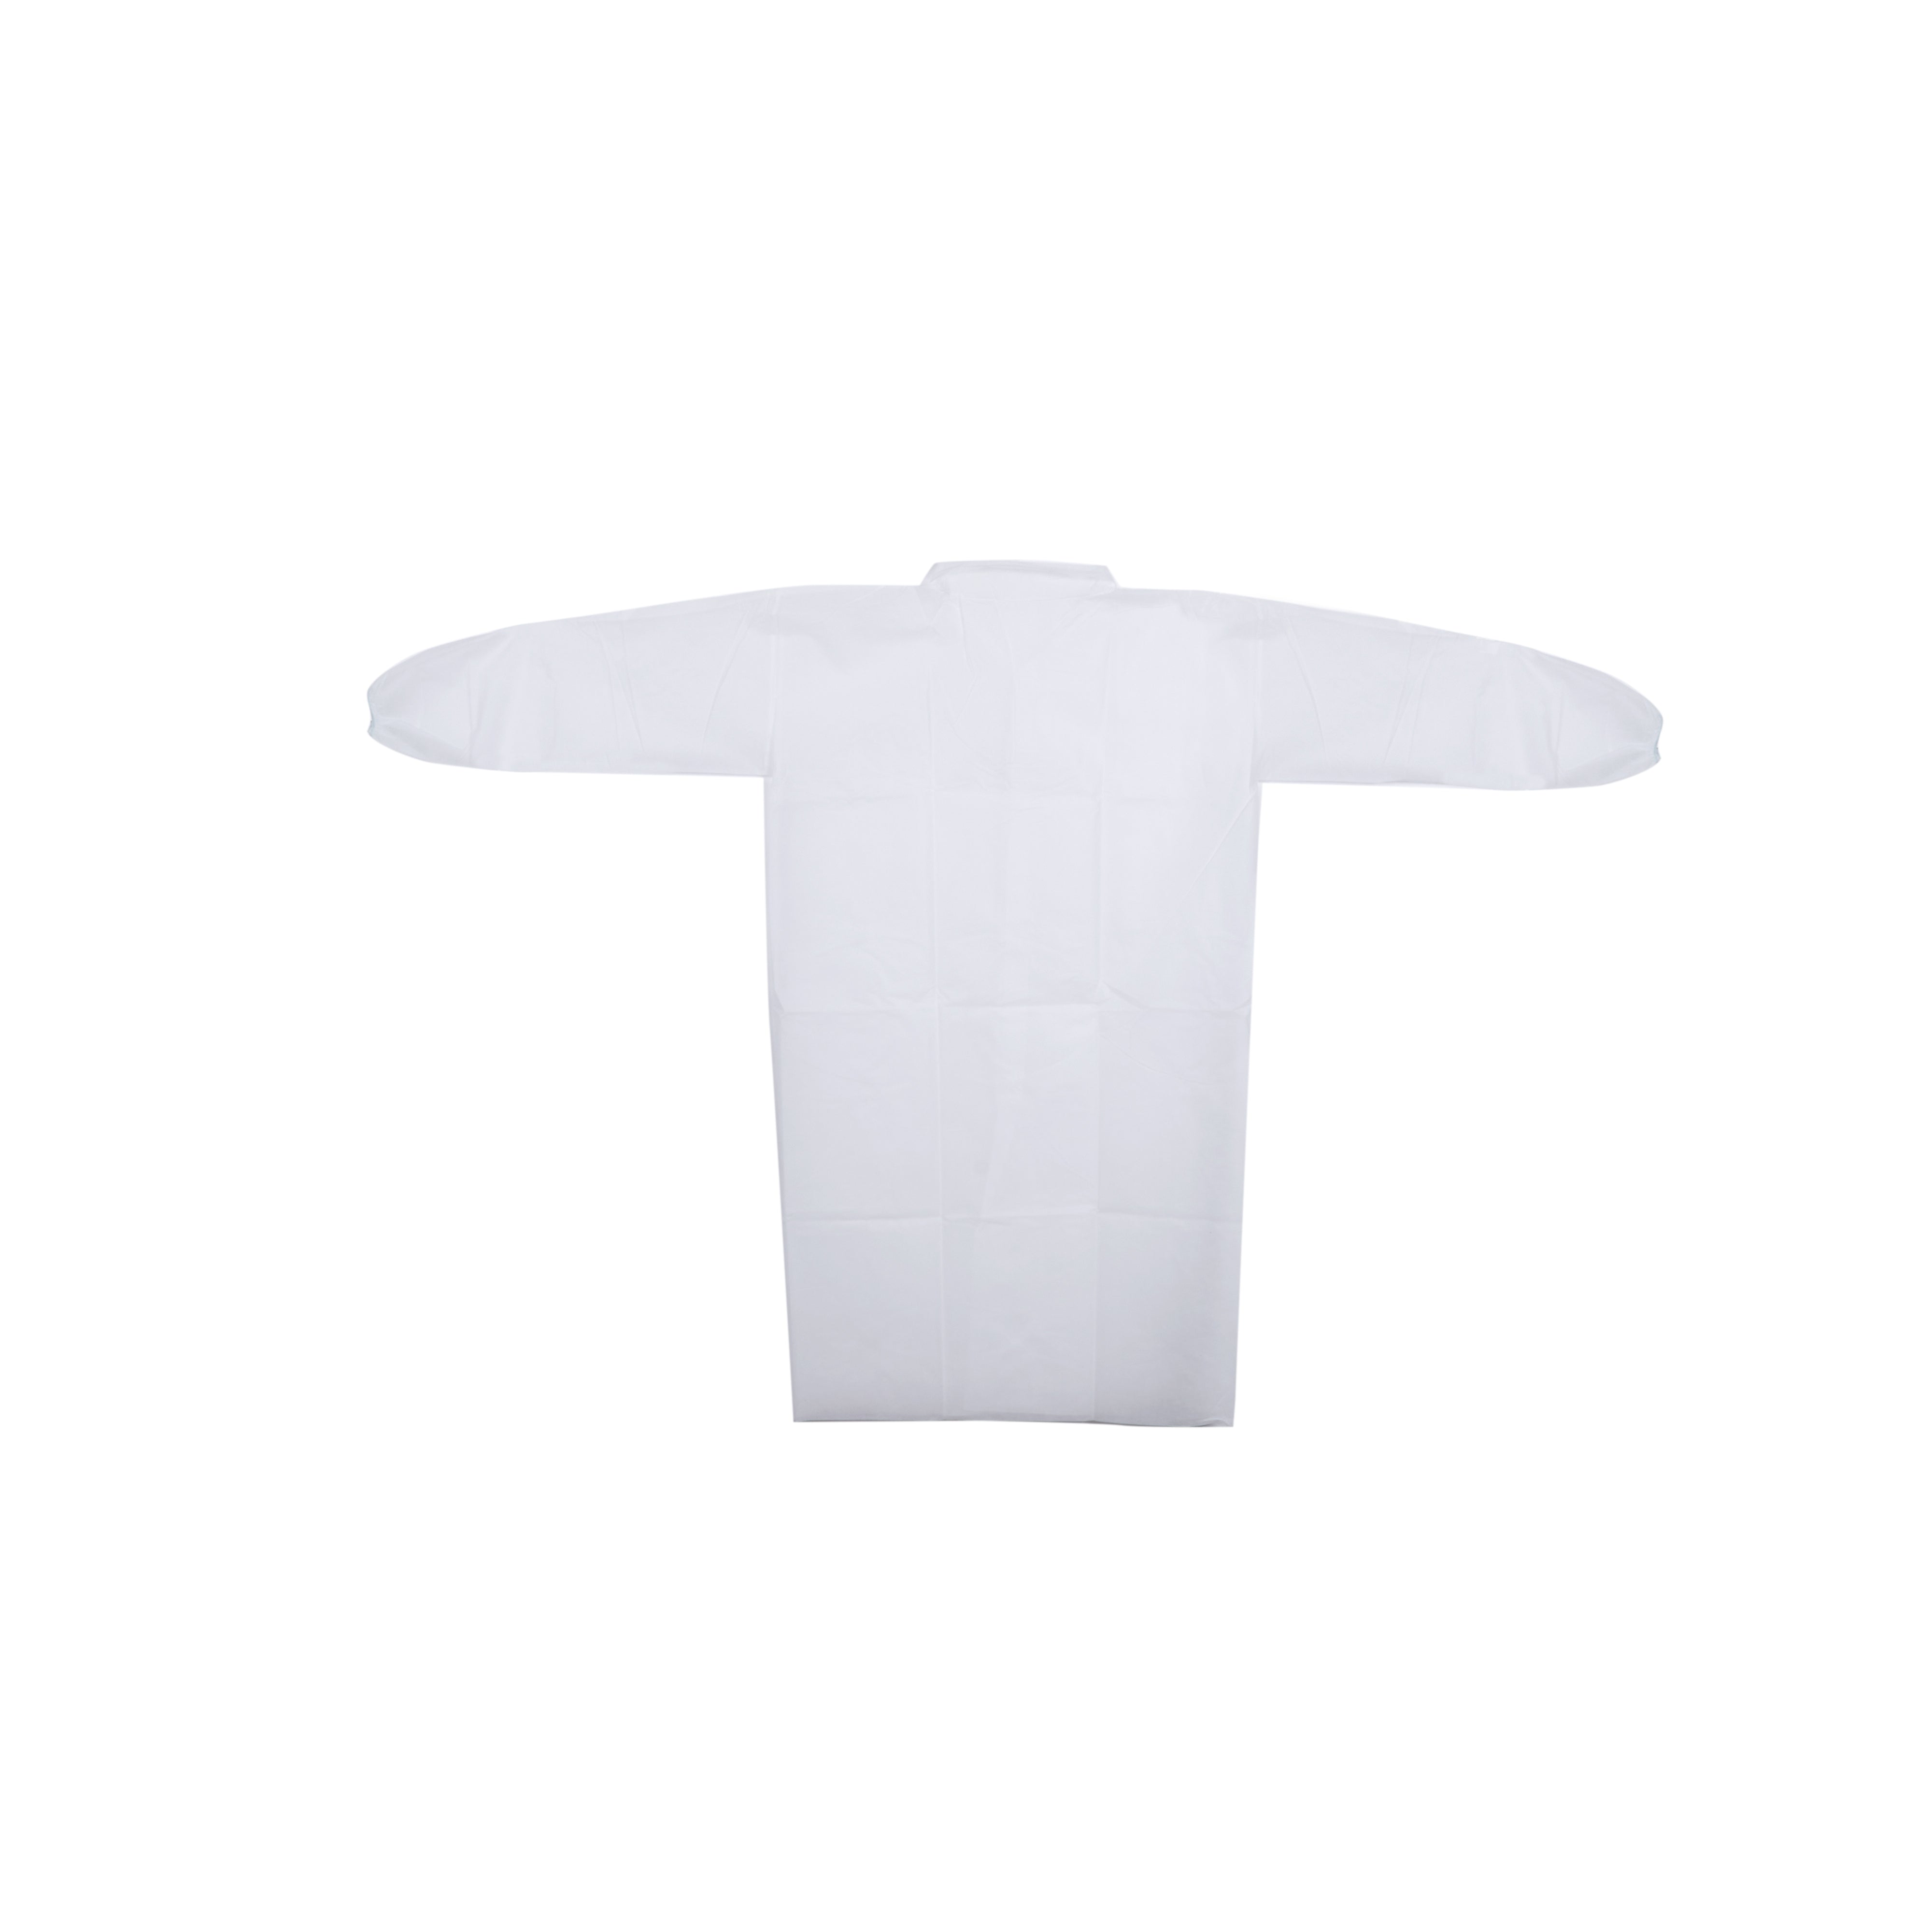 50 Pieces Non Woven Visitor Coat White Color Large